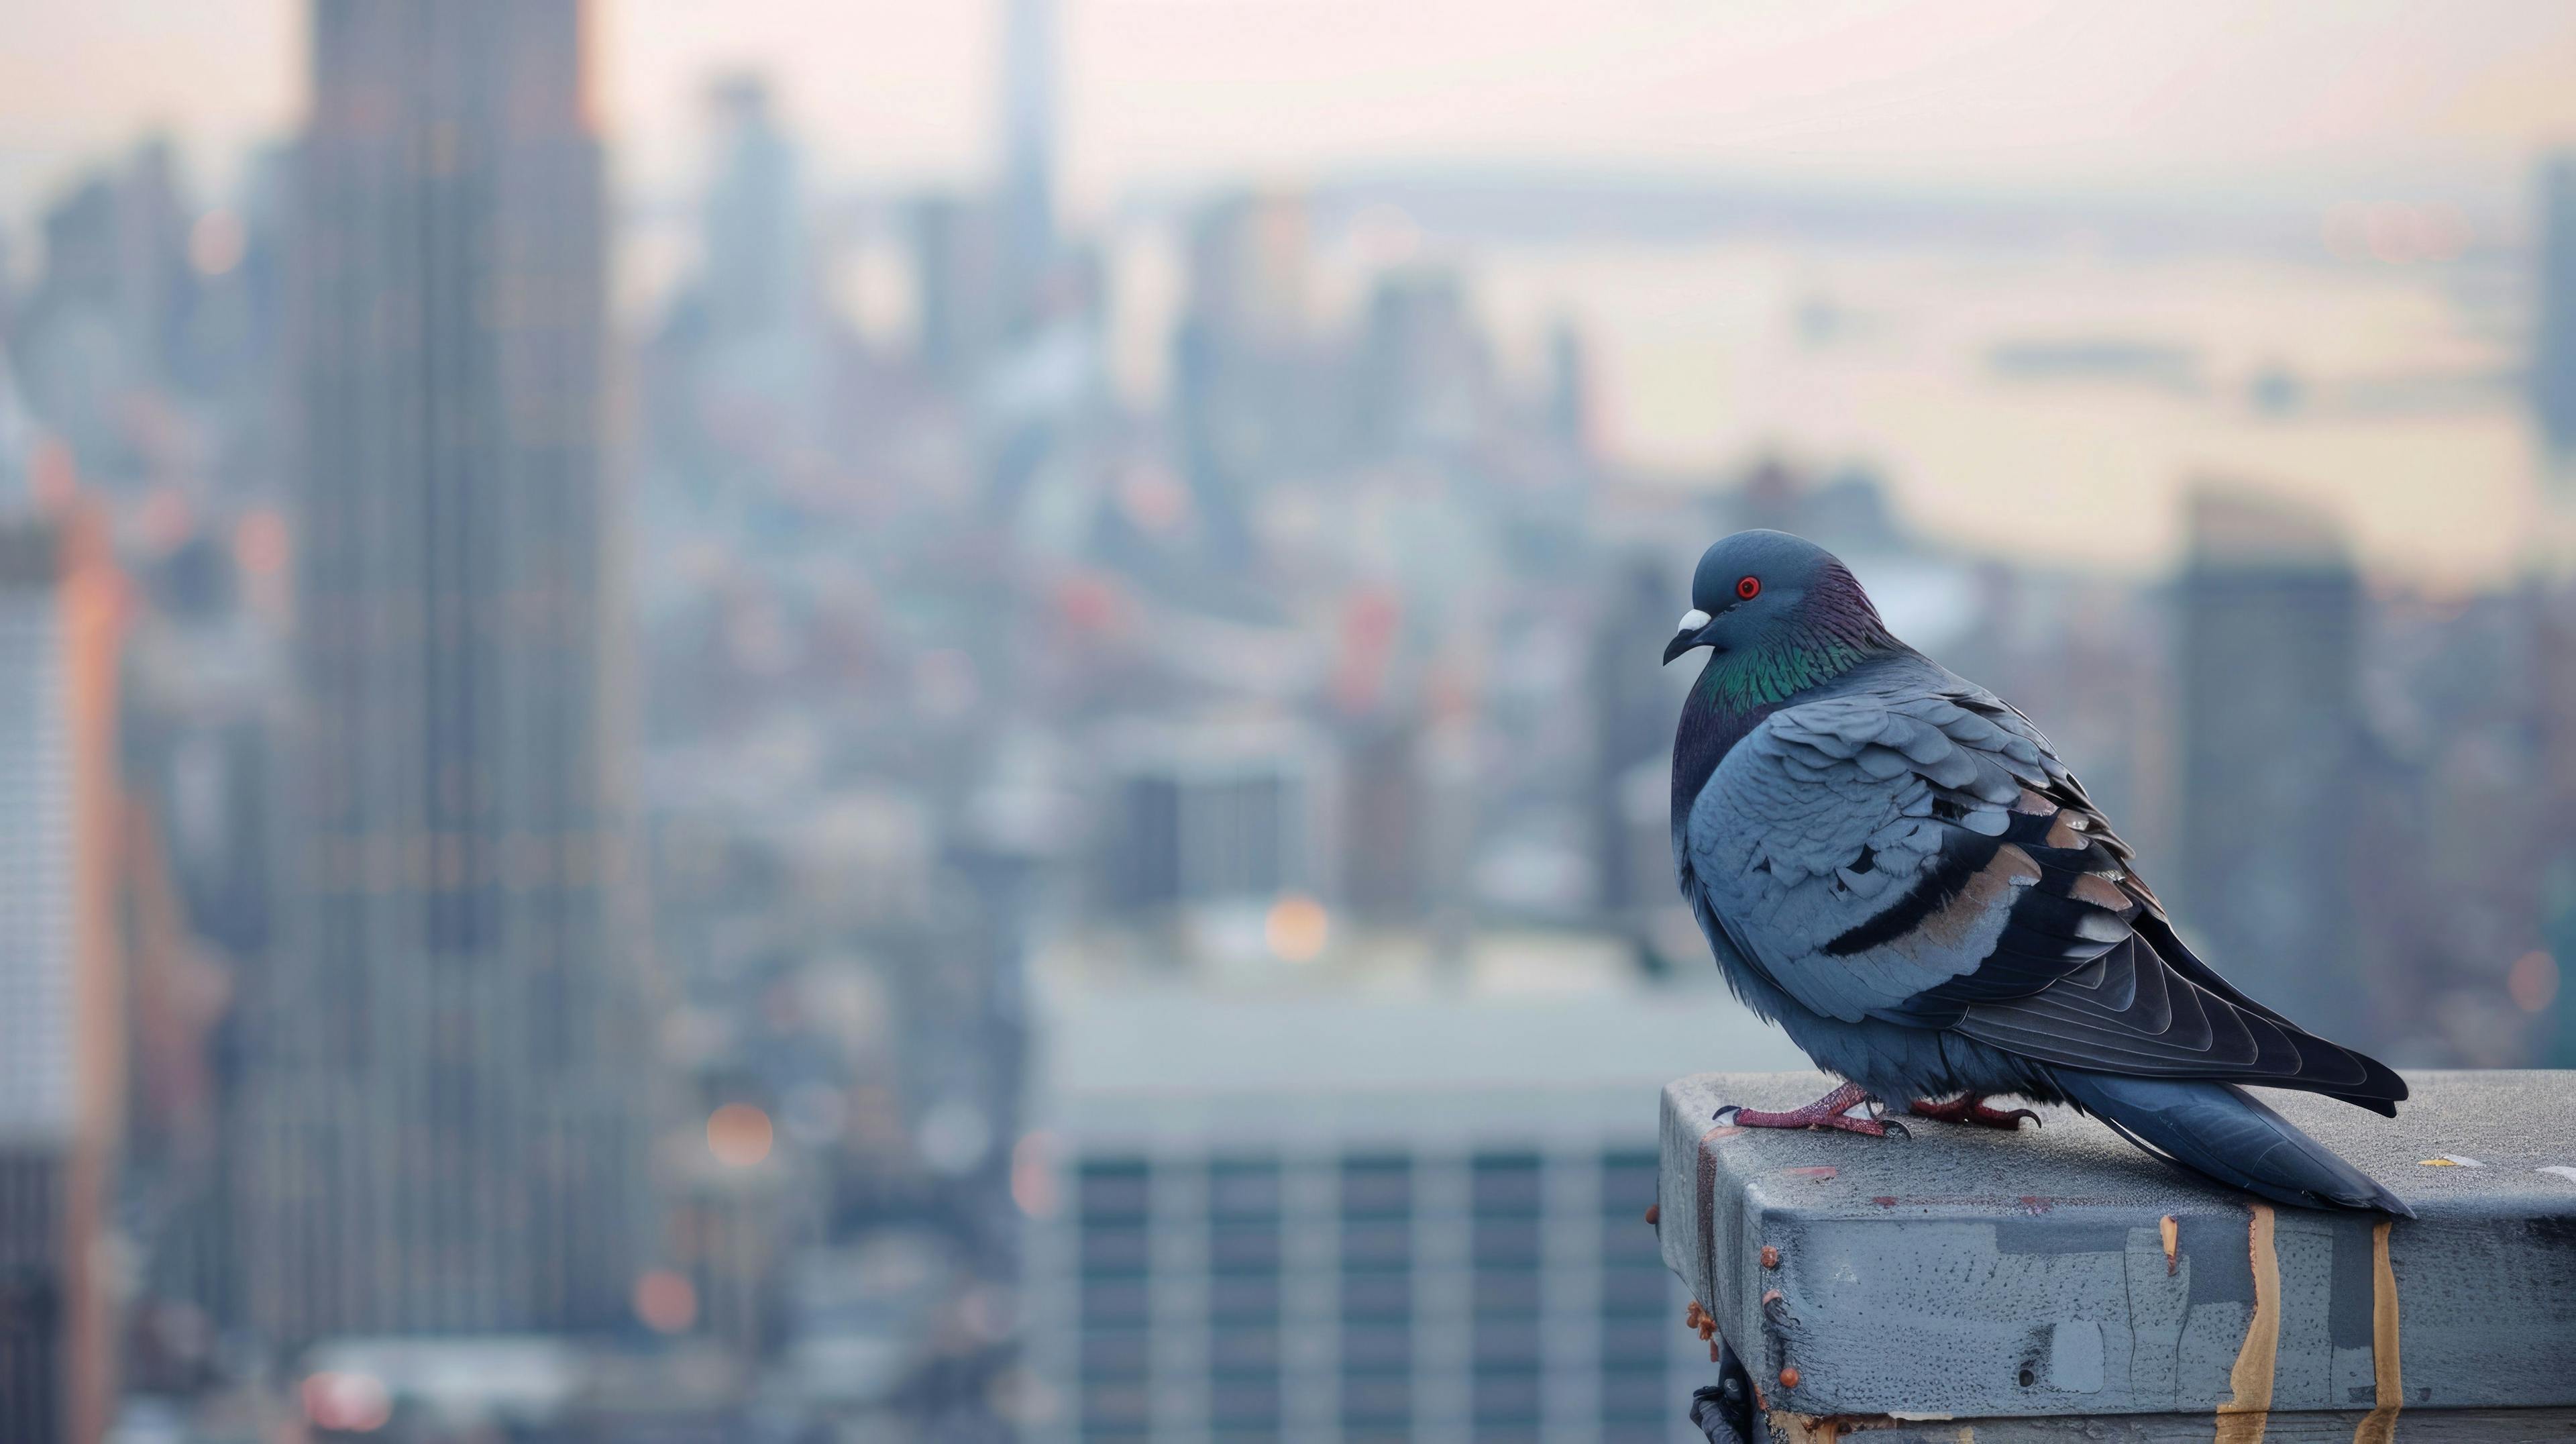 City Ledge. Aerial View of NYC Pigeon on Altitude Ledge in the Urban Background | Image Credit: © Popelniushka - stock.adobe.com